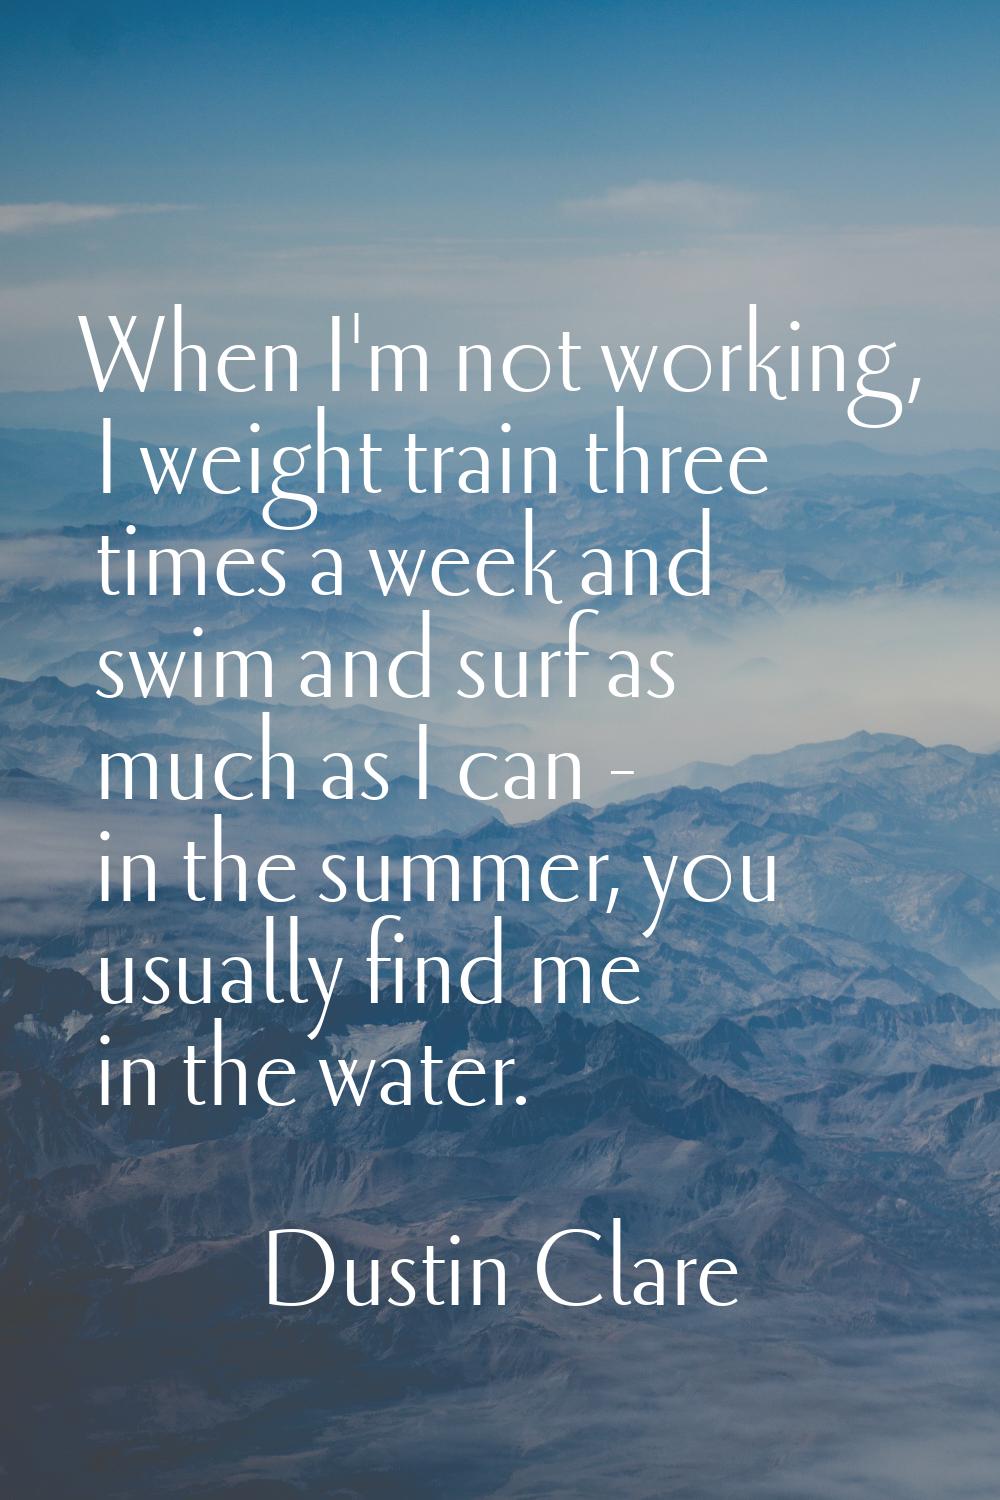 When I'm not working, I weight train three times a week and swim and surf as much as I can - in the